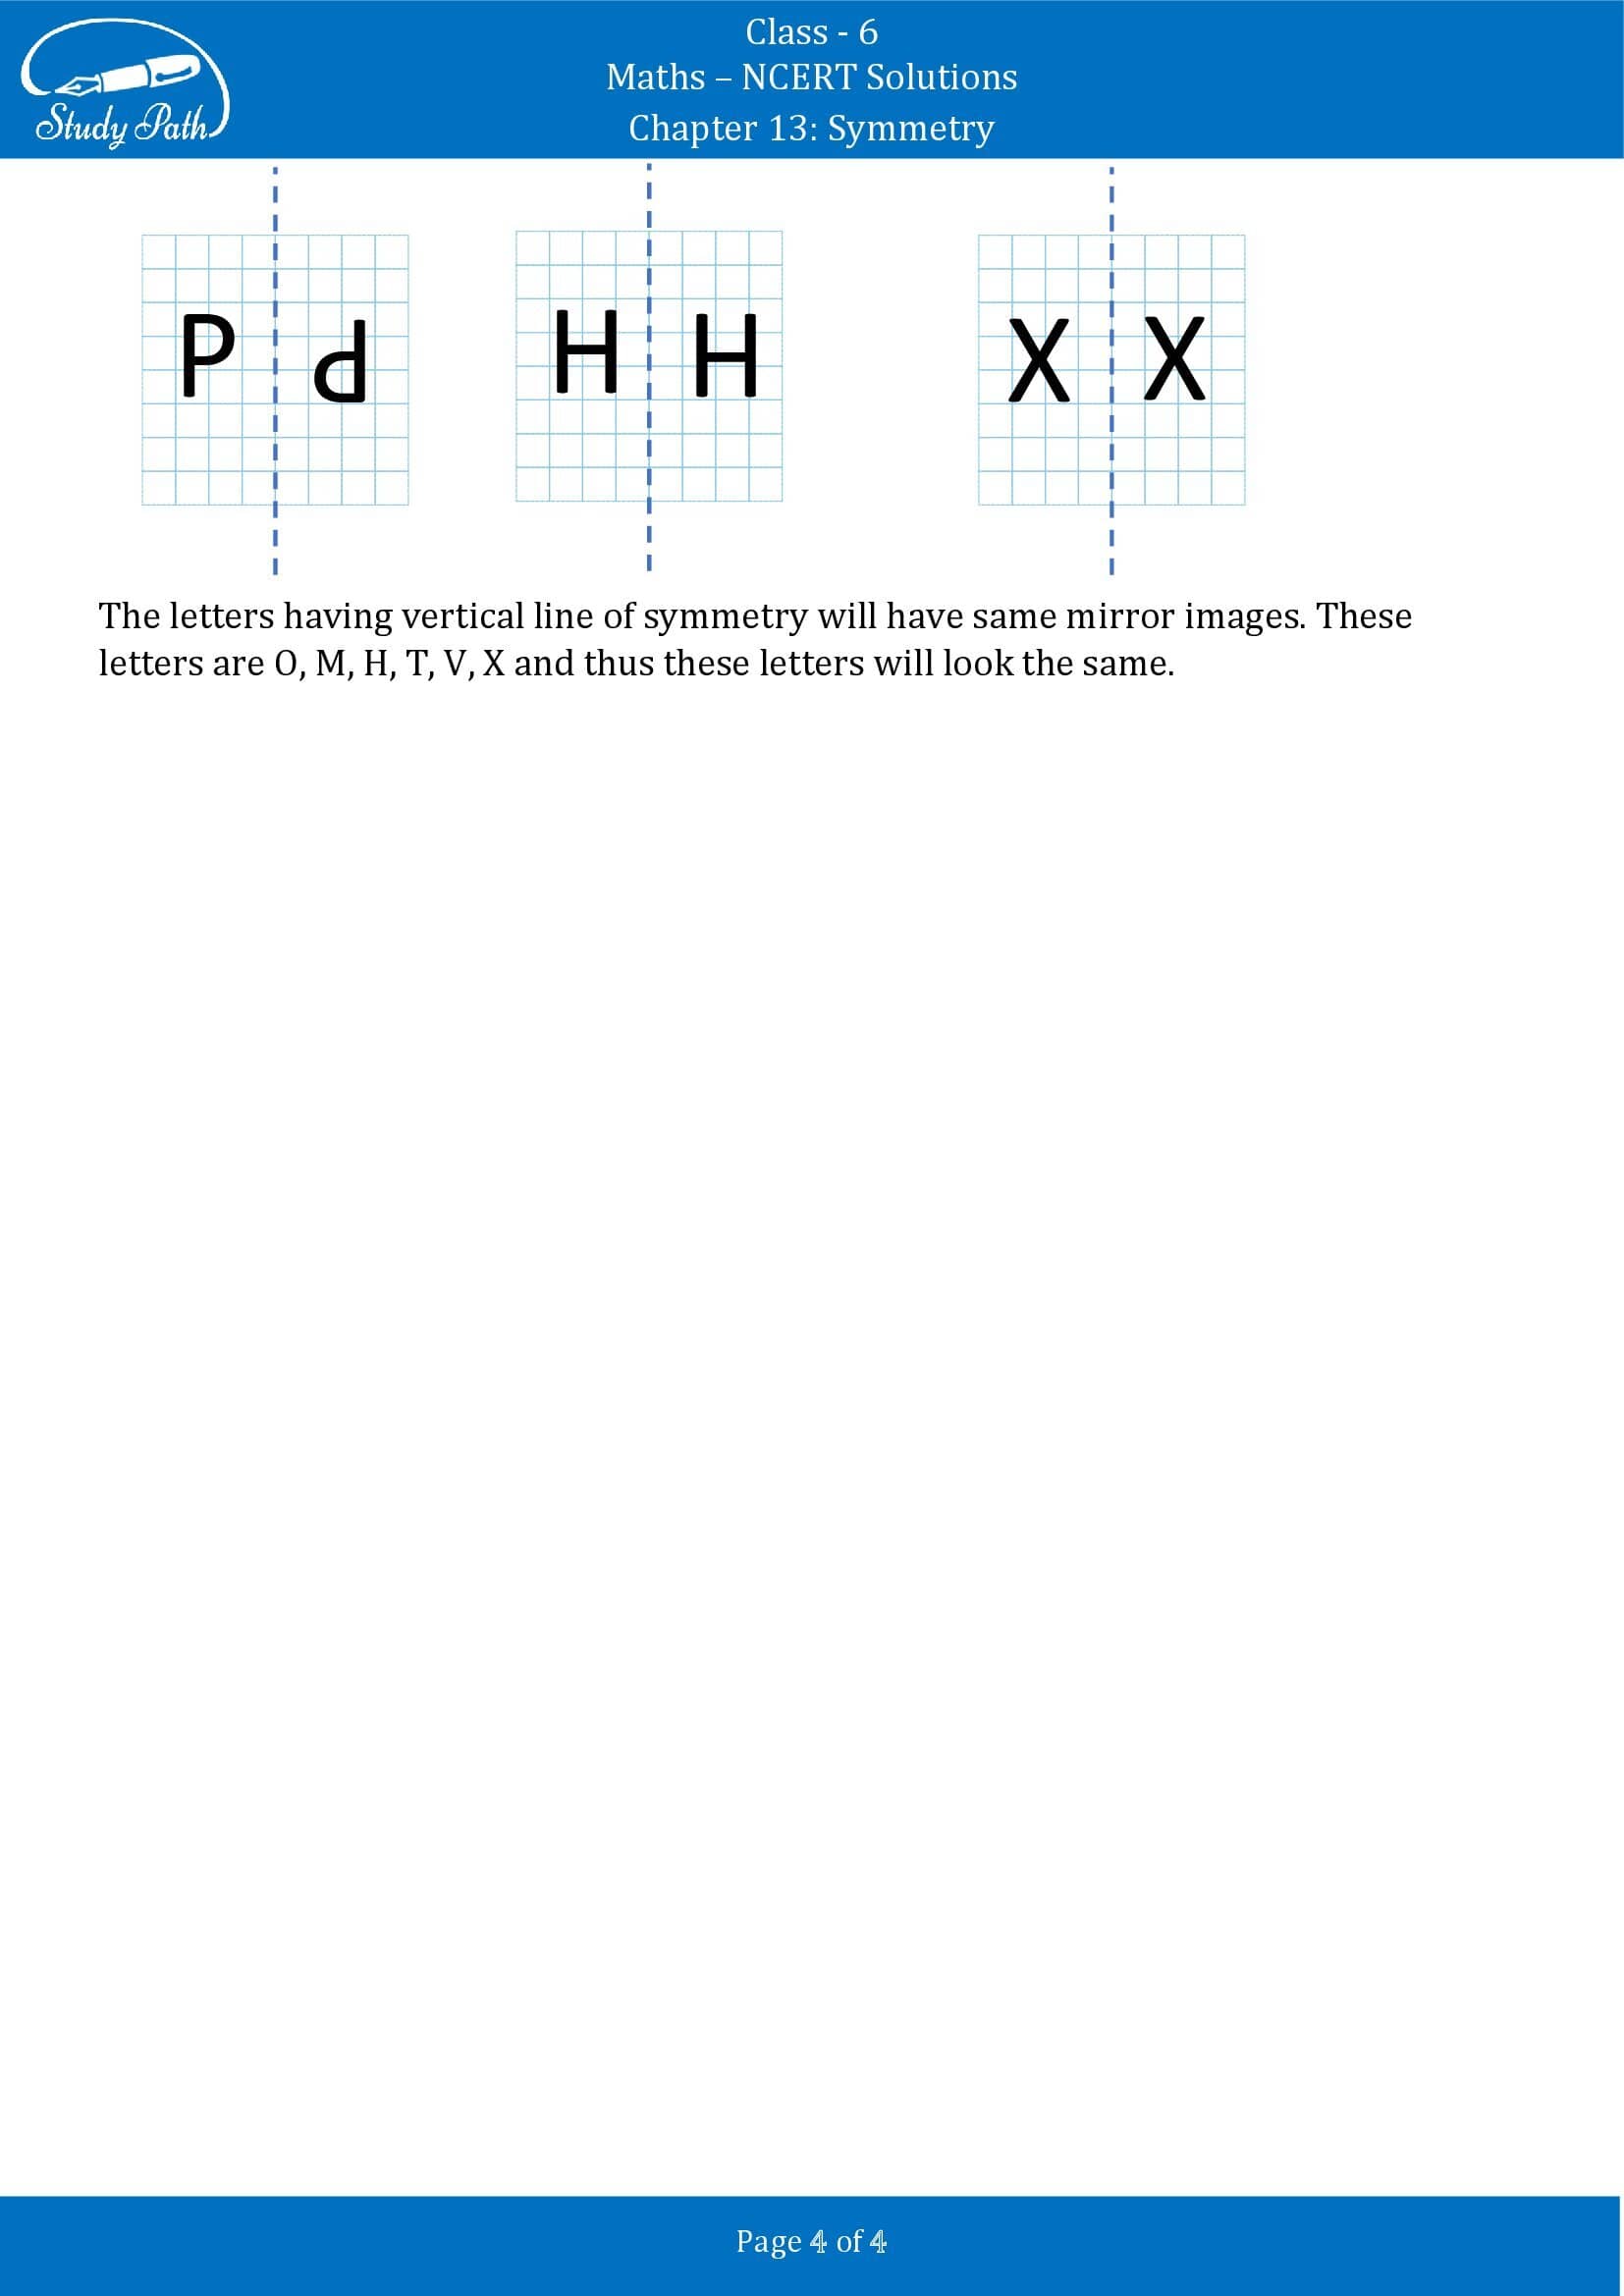 NCERT Solutions for Class 6 Maths Chapter 13 Symmetry Exercise 13.3 00004